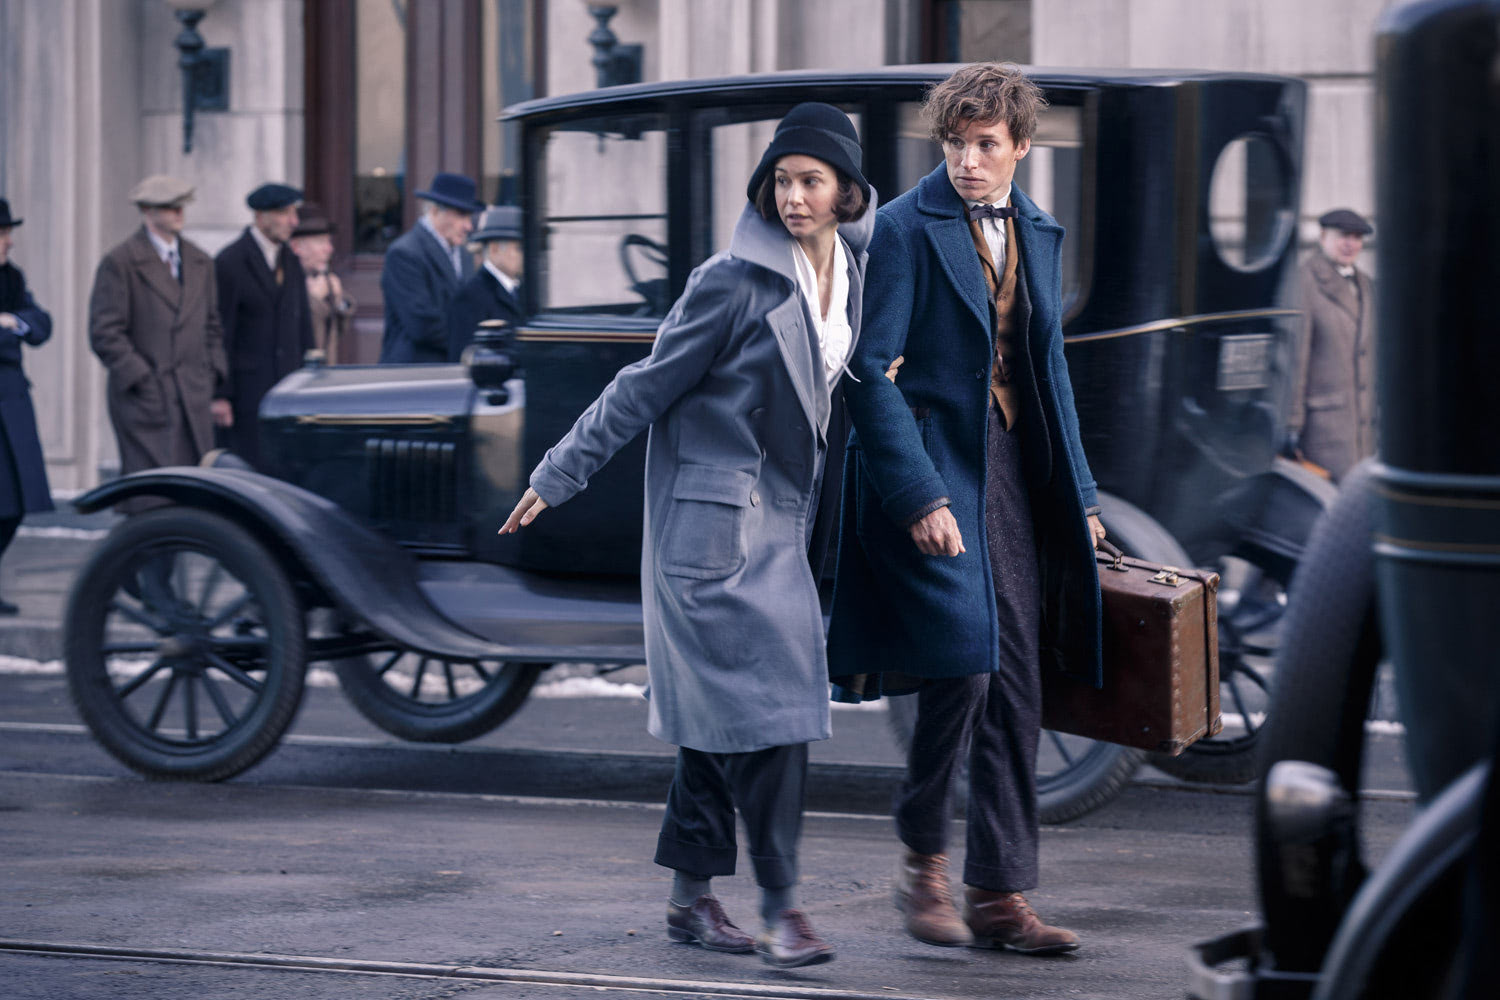 Newt and Tina on the streets of New York